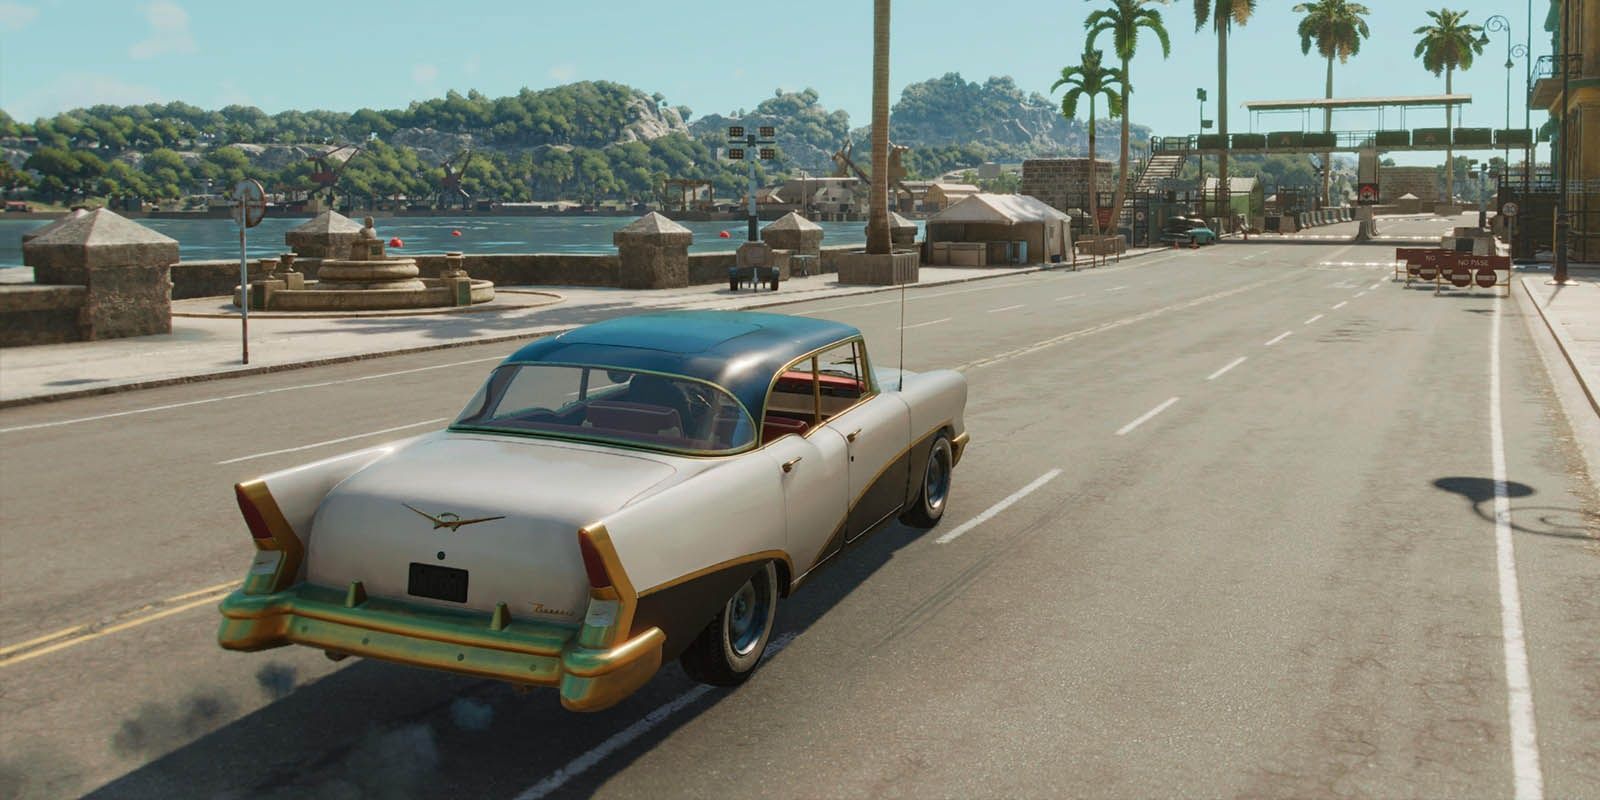 Far Cry 1965 Beaumont "El Presidente" vehicle driving on a road